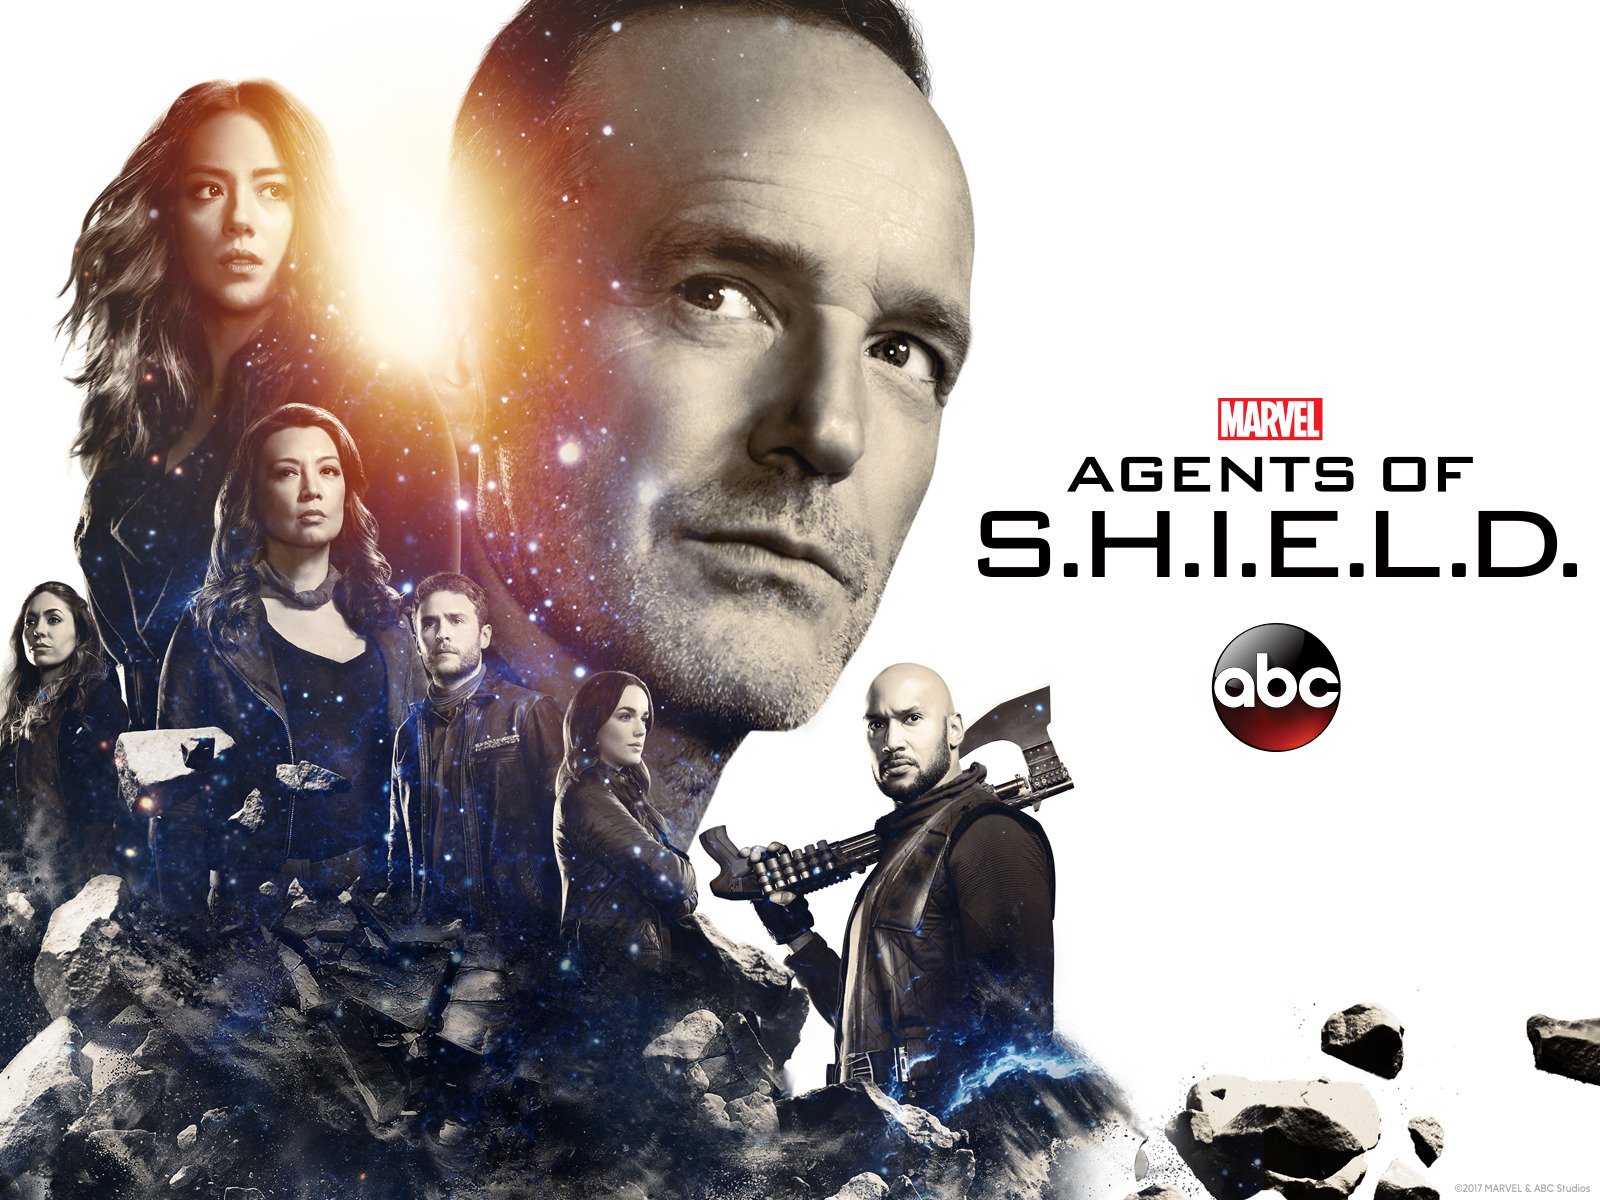 1st Look: “Agents of SHIELD” Returns